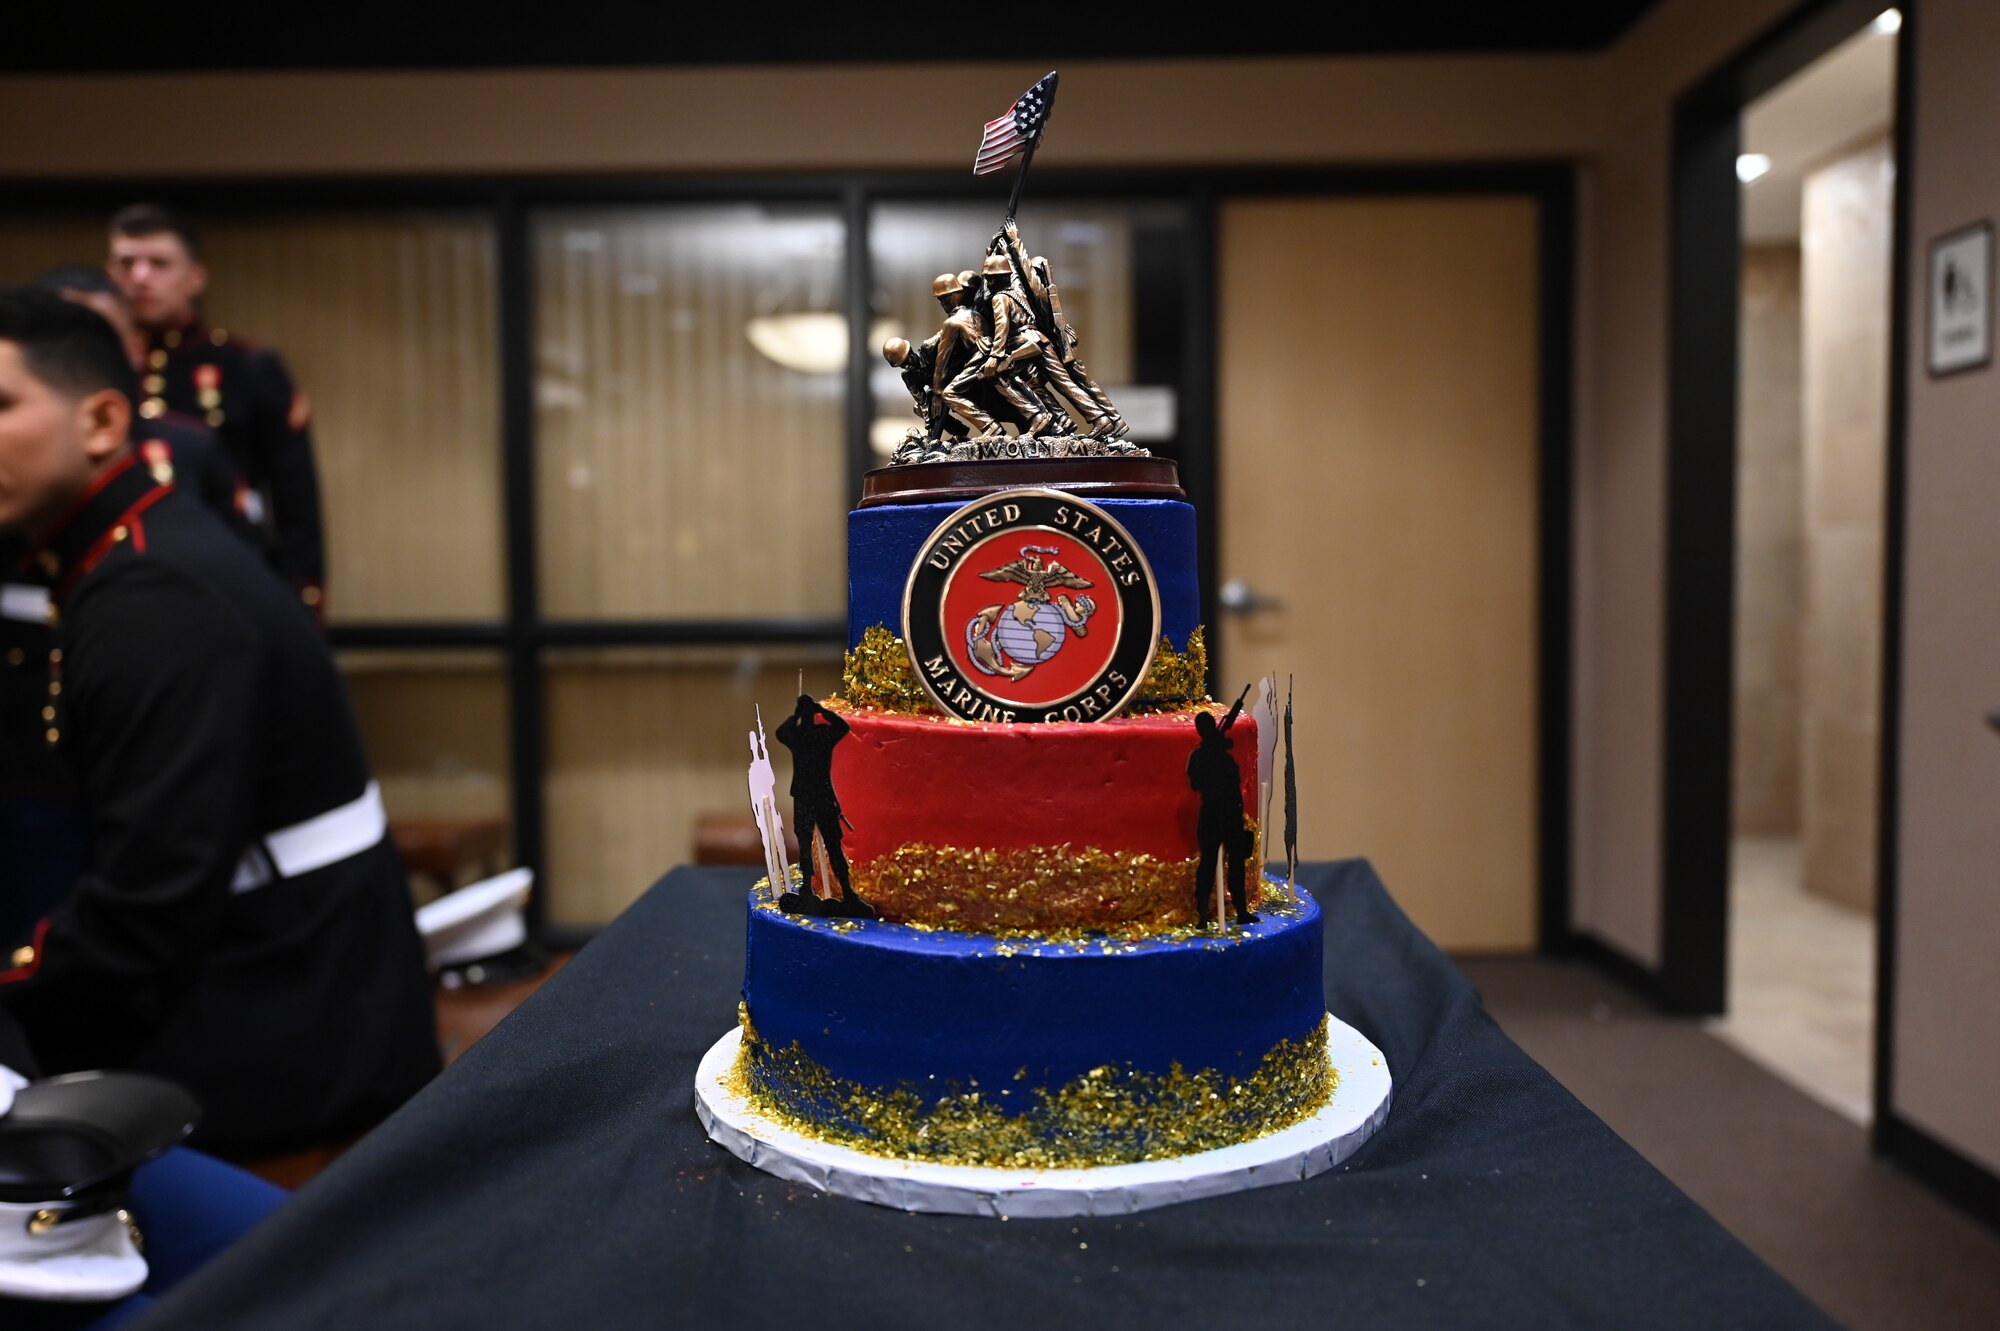 The U.S. Marine Corps birthday cake rests on a cart at the McNease Convention Center, San Angelo, Texas, Nov. 4, 2022. The opening ceremonies consisted of various events paying homage to the 247-year-old history of the United States Marine Corps. (U.S. Air Force photo by Senior Airman Michael Bowman)